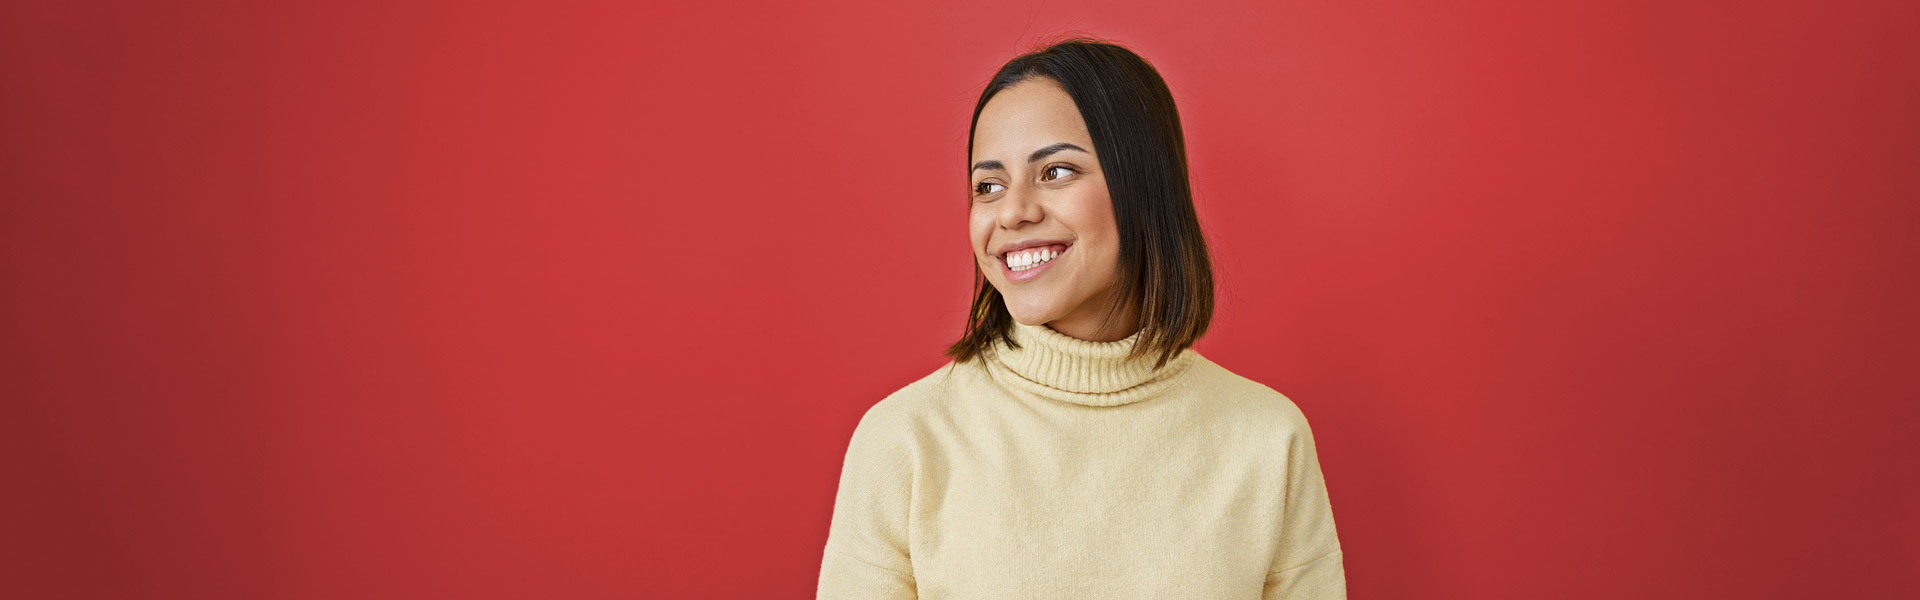 A young woman with long dark brown hair smiles off to the side. She is wearing a cream turtleneck sweater. The background is a solid red.